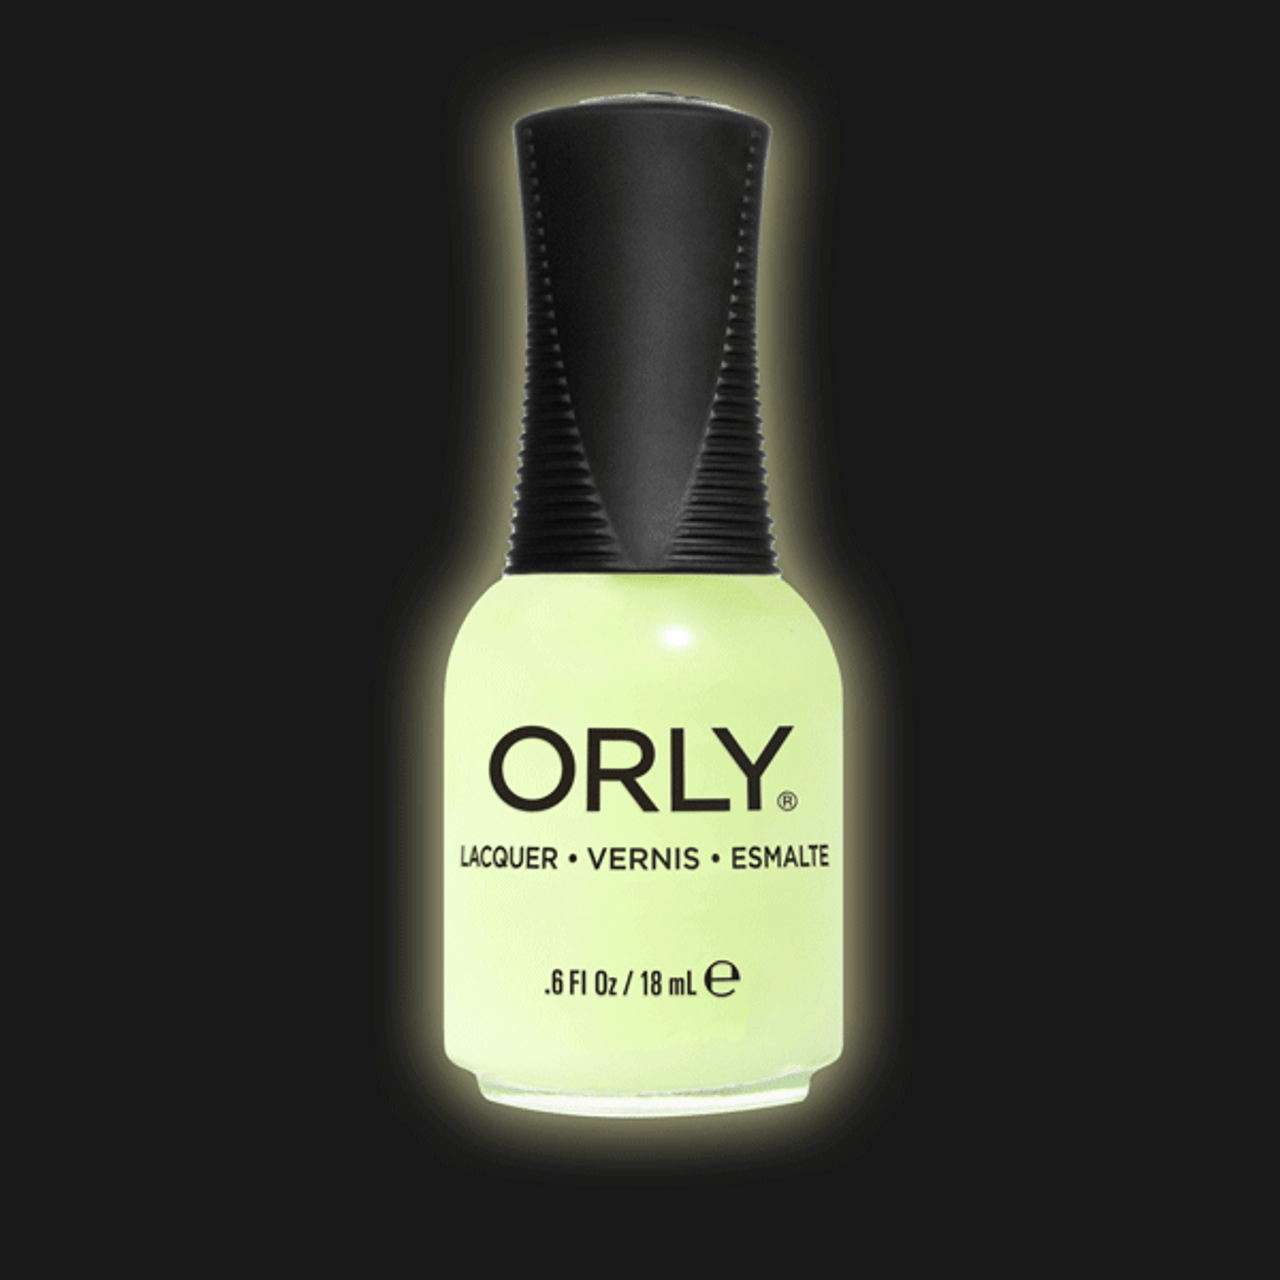 ORLY Pro Premium Nail Lacquer Glow Up - Top Effect - .6 fl oz / 18 mL